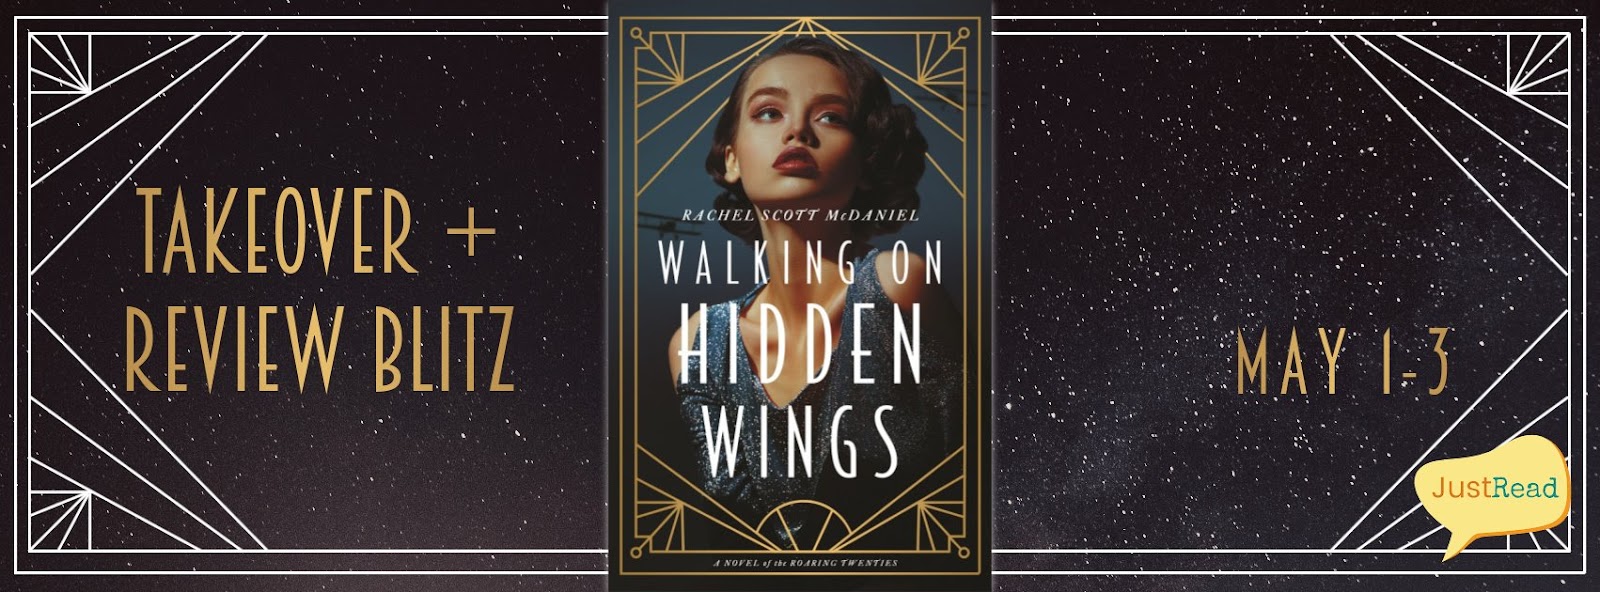 Walking on Hidden Wings JustRead Takeover + Review Blitz